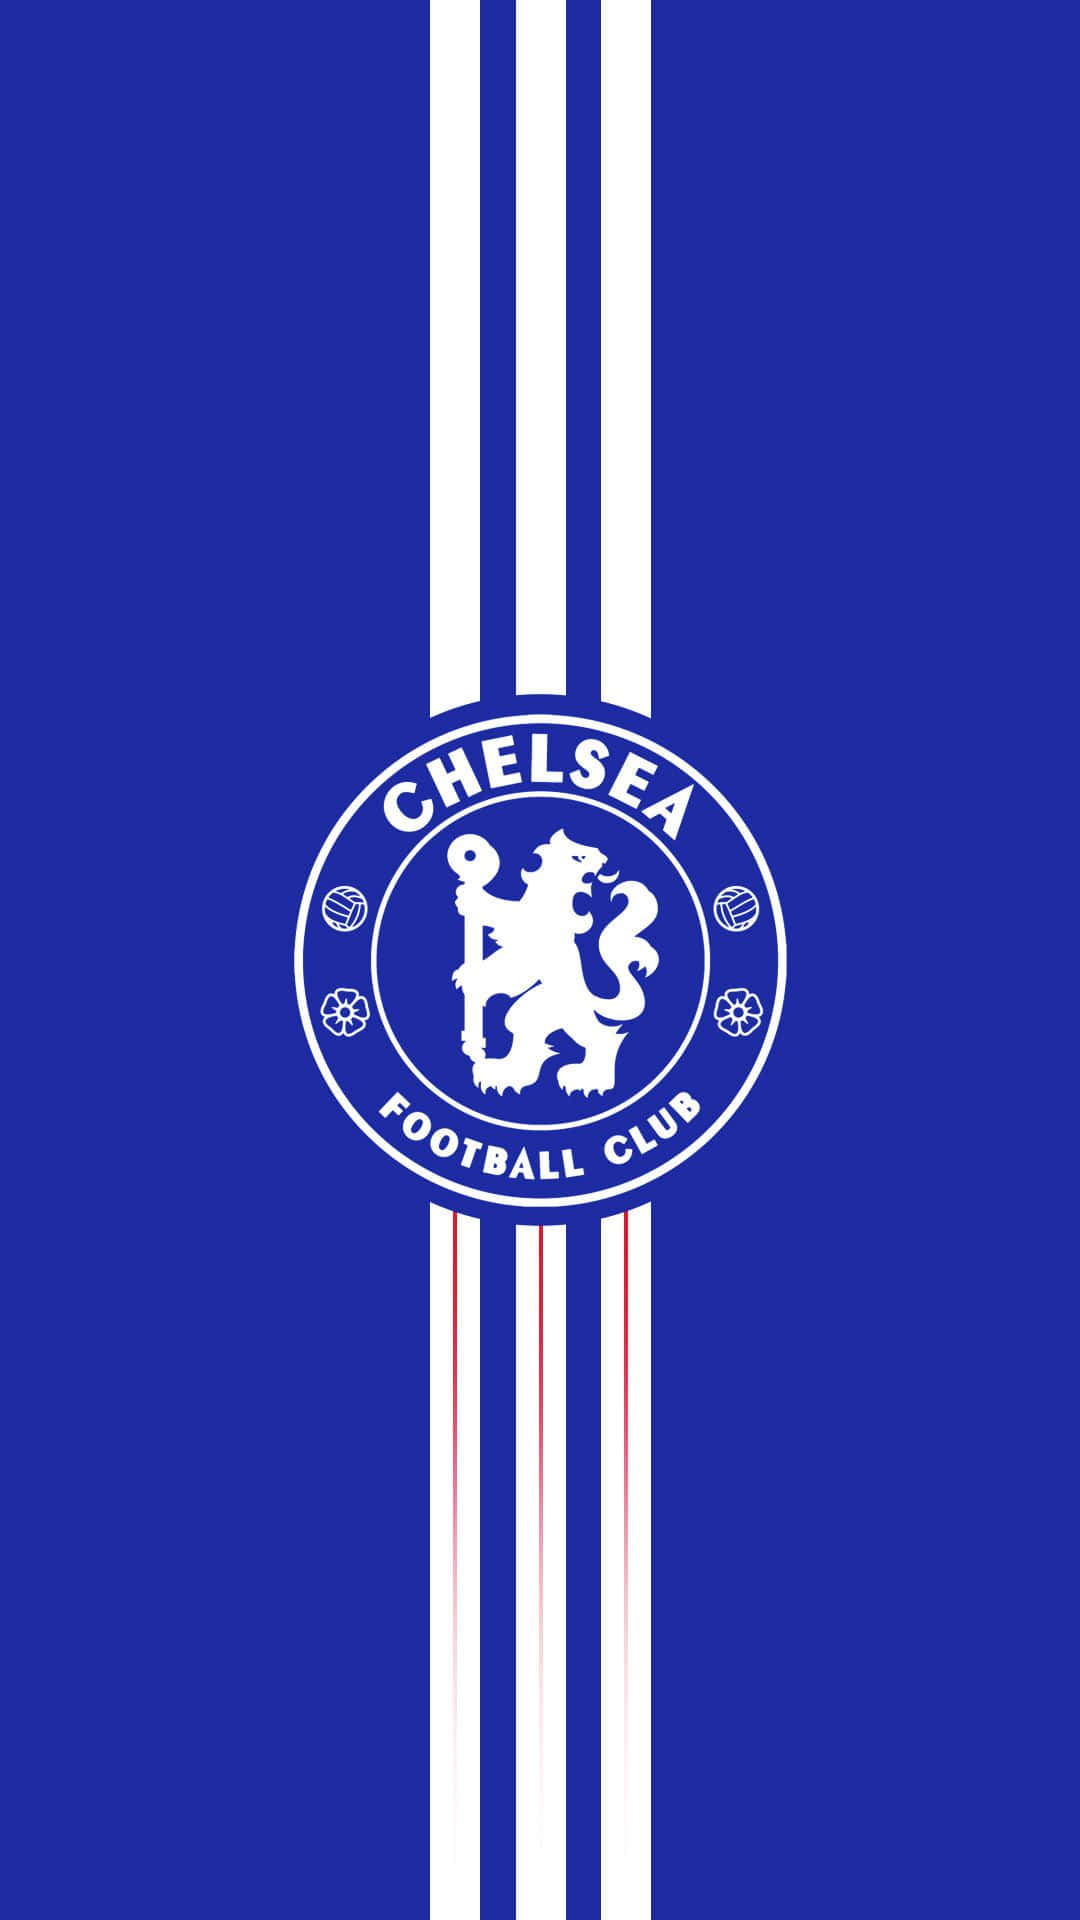 Enjoy your Chelsea team enthusiasm with your iPhone! Wallpaper